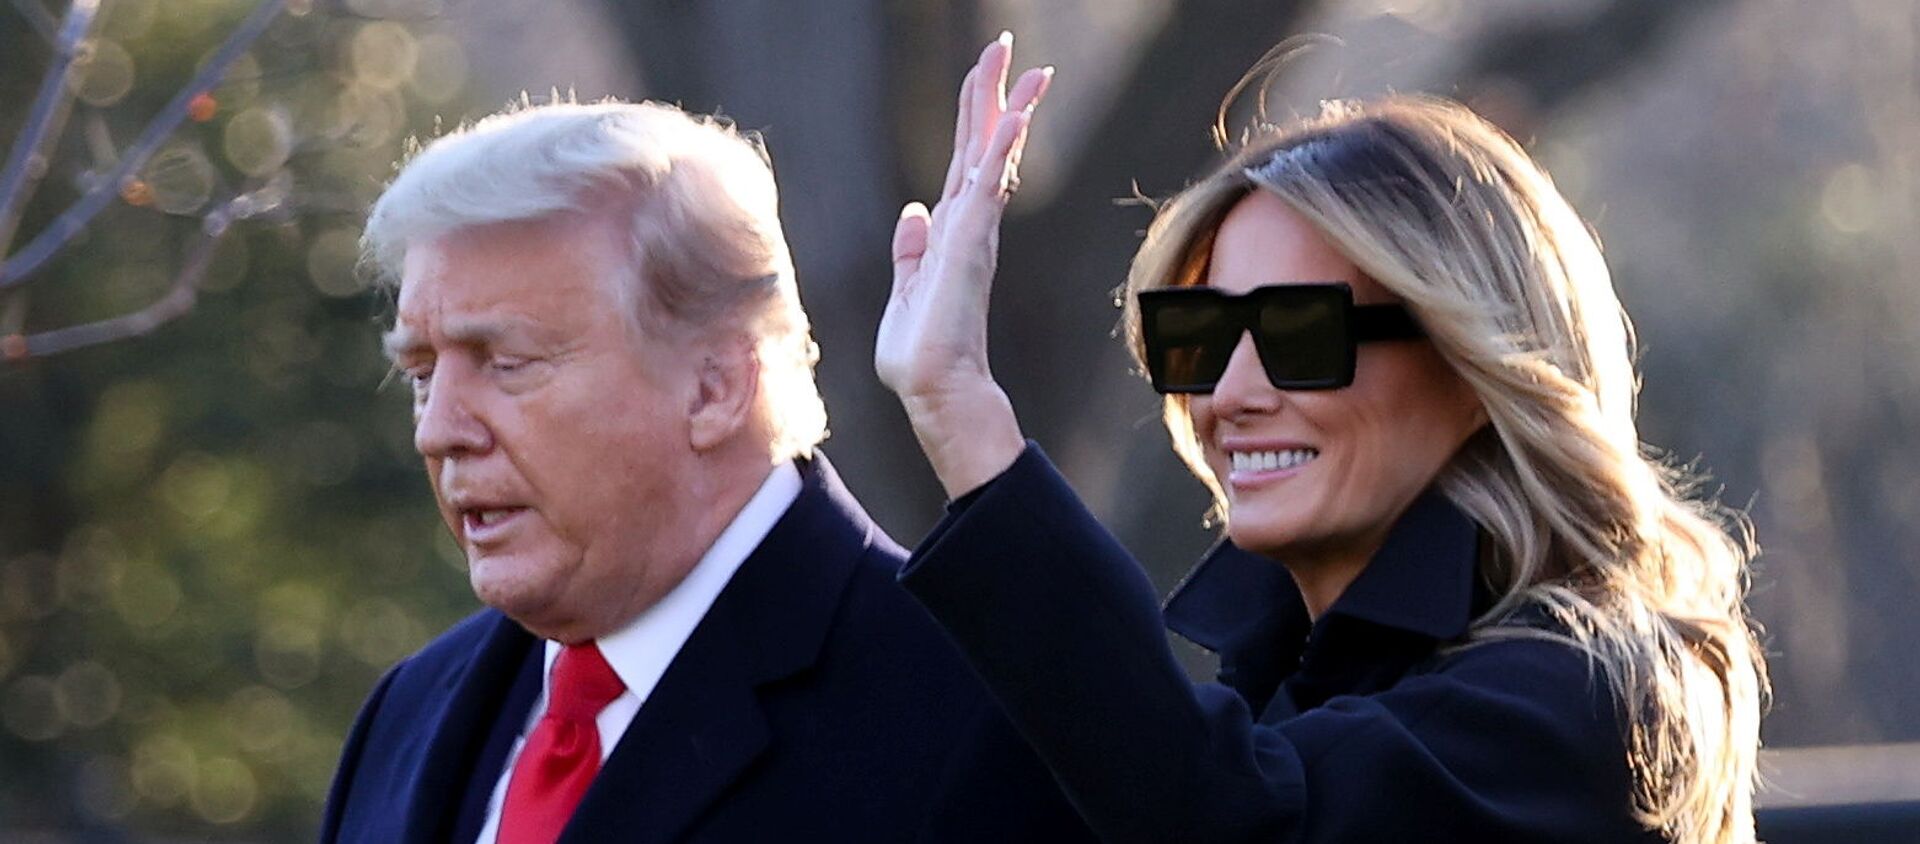 U.S. President Donald Trump and first lady Melania Trump depart for holiday travel to Florida from the White House in Washington, U.S. December 23, 2020 - Sputnik International, 1920, 27.01.2021